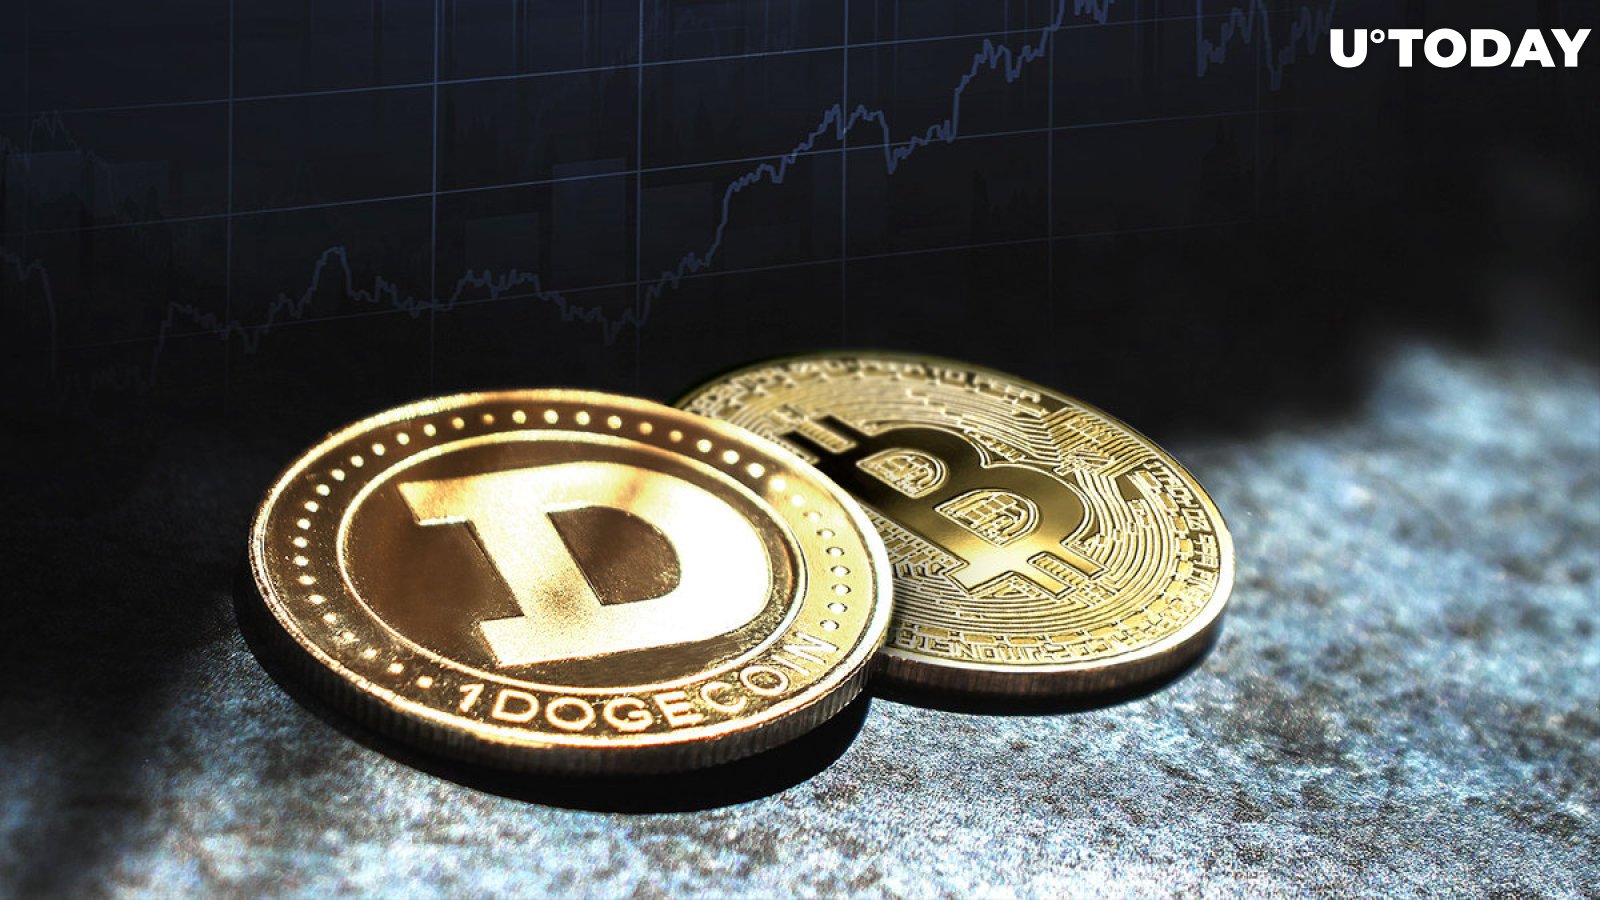 Dogecoin Co-Founder Makes Unexpected Bitcoin Statement